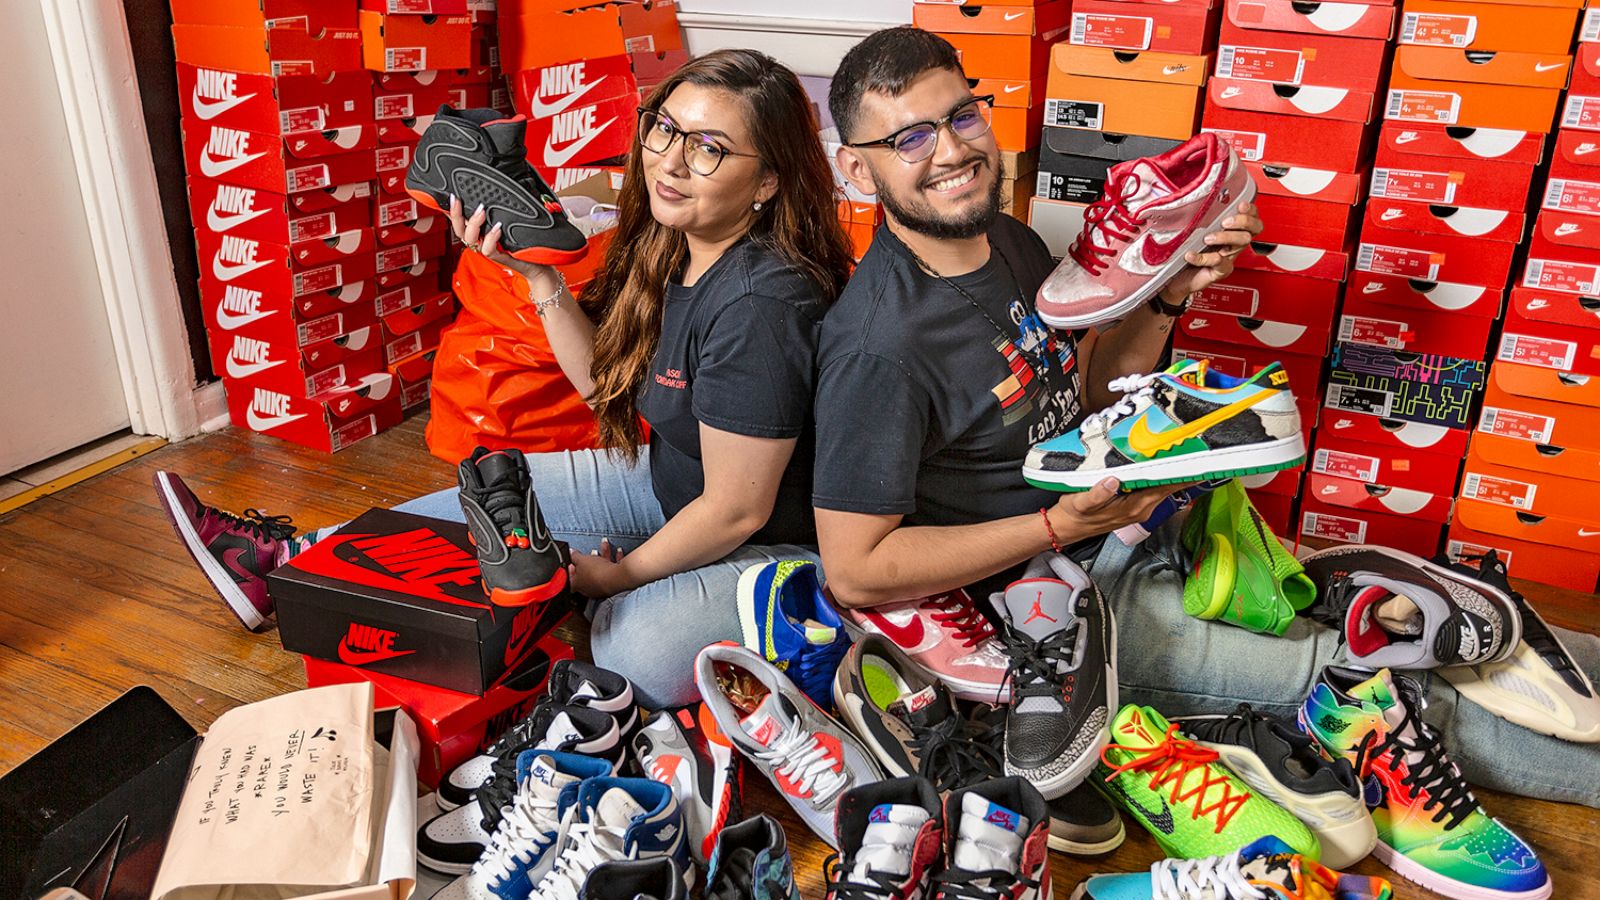 paspoort Zeggen influenza Dallas educators tap into sneakerhead culture to give new shoes to students  in need - Good Morning America